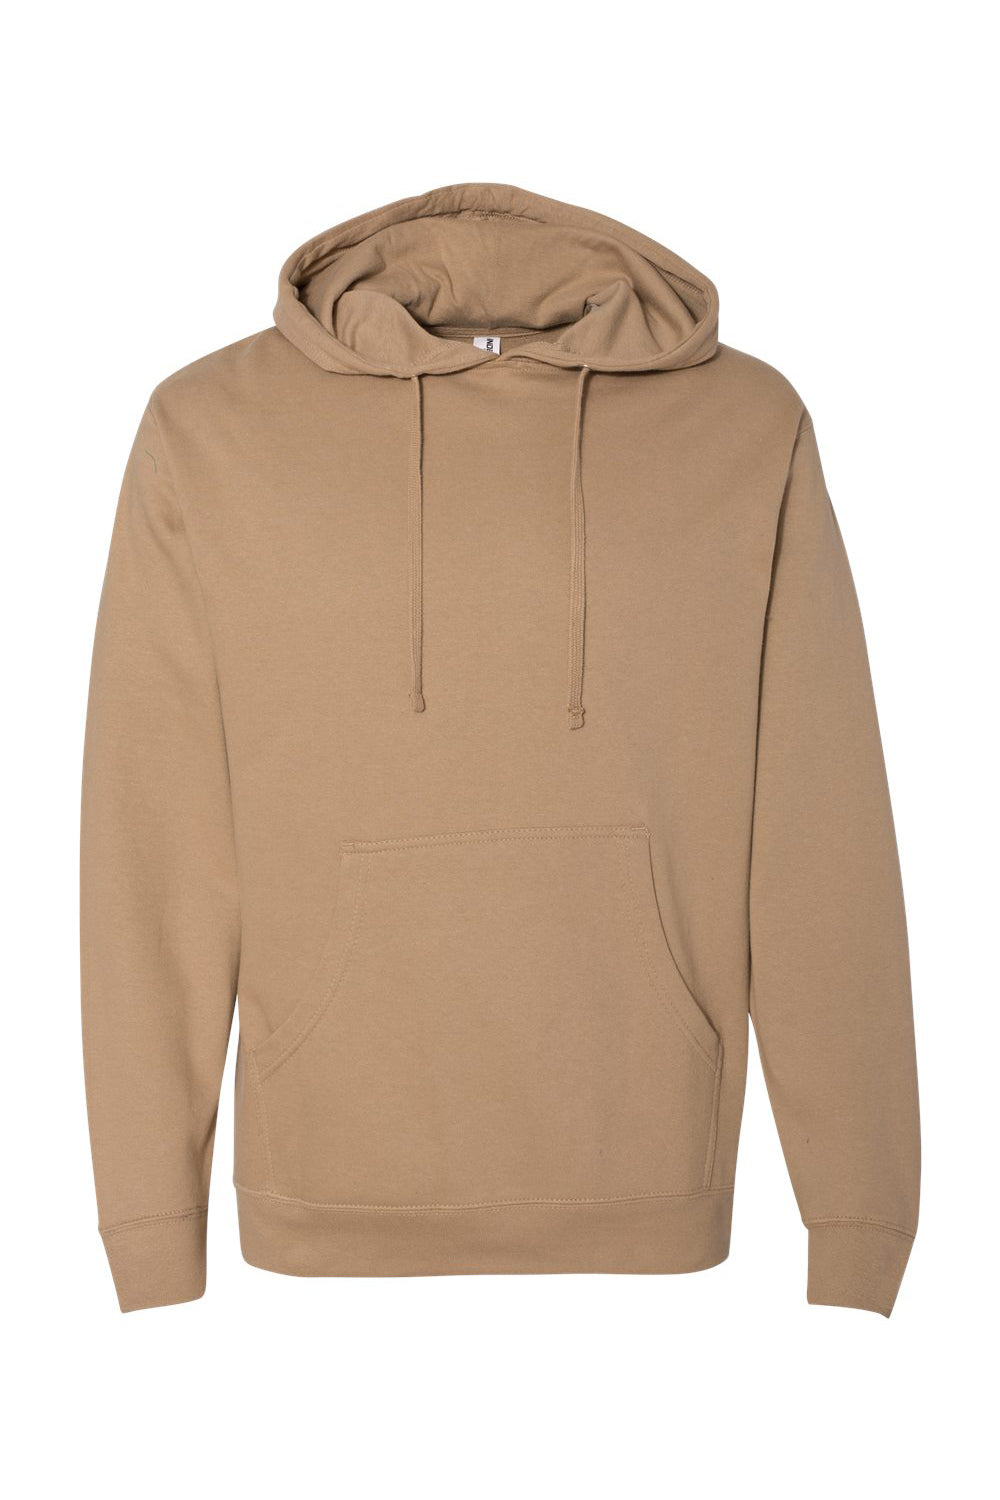 Independent Trading Co. SS4500 Mens Hooded Sweatshirt Hoodie Sandstone Brown Flat Front